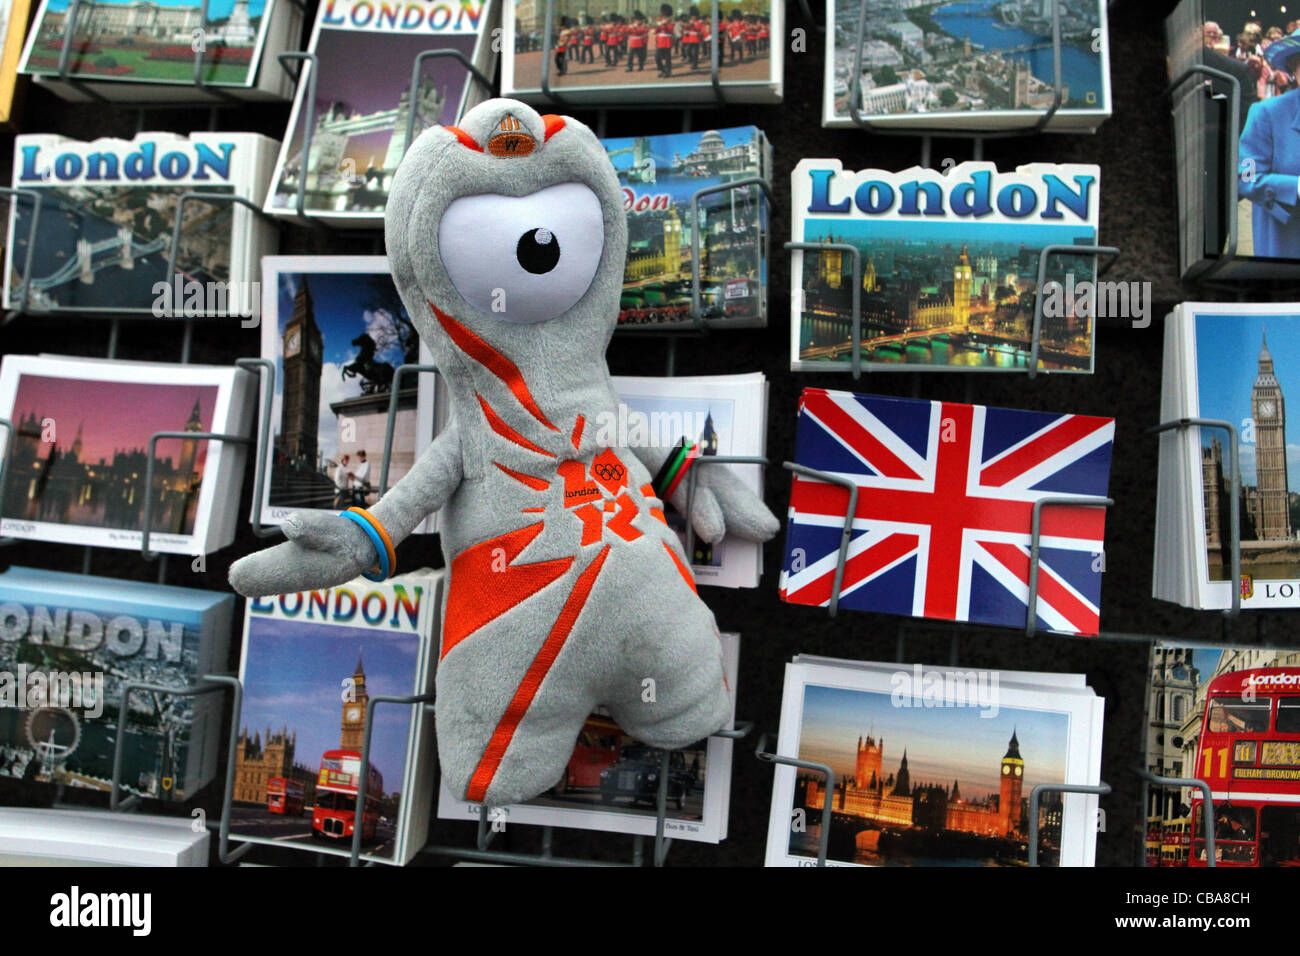 20 11 2010 Preview on The Olympic Games 2012 in London Picture shows the Mascots in front of a display of London postcards Stock Photo